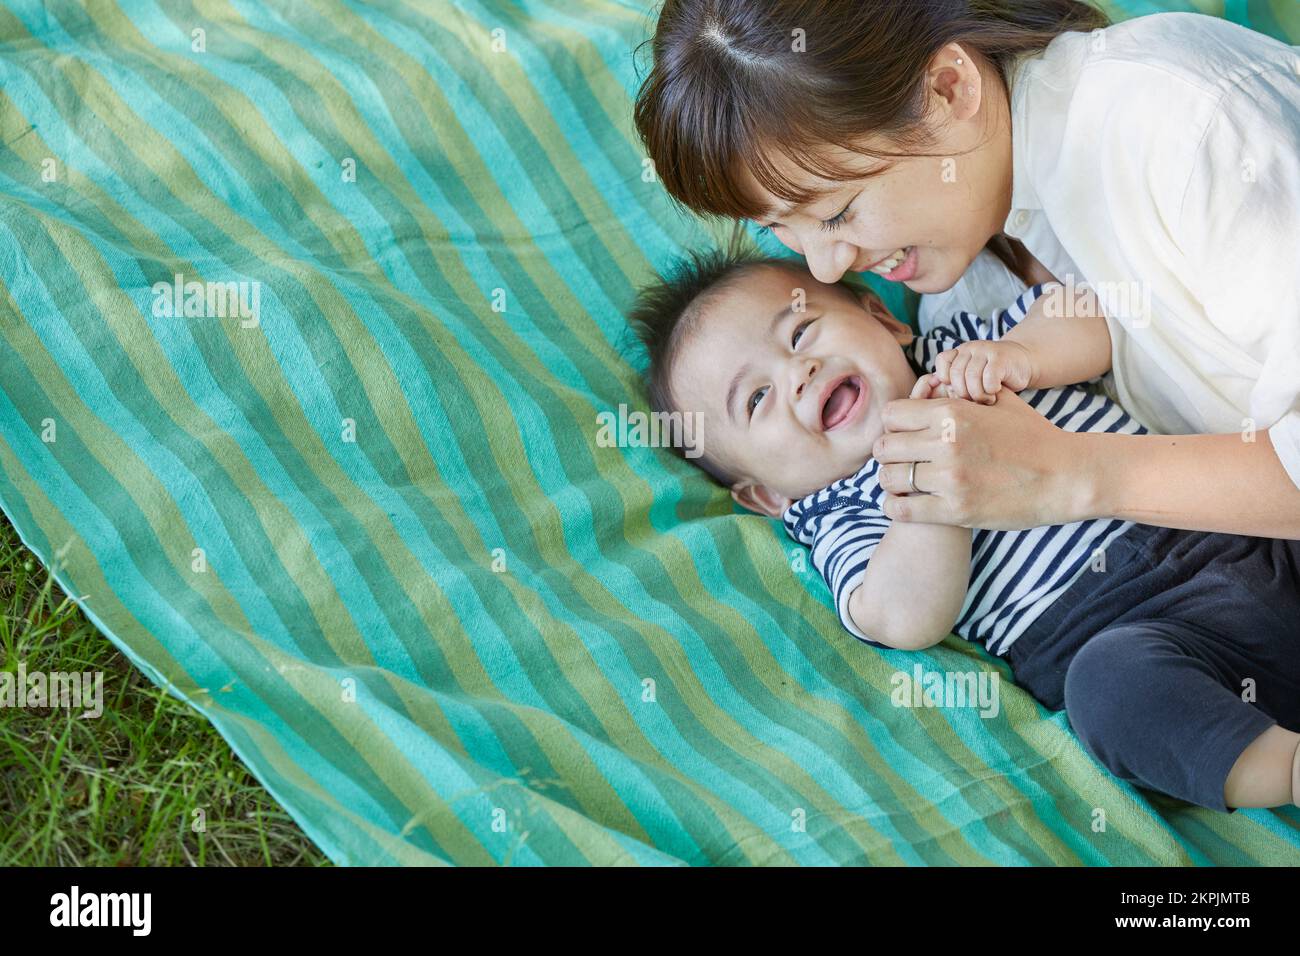 Japanese mother cuddling with her baby Stock Photo